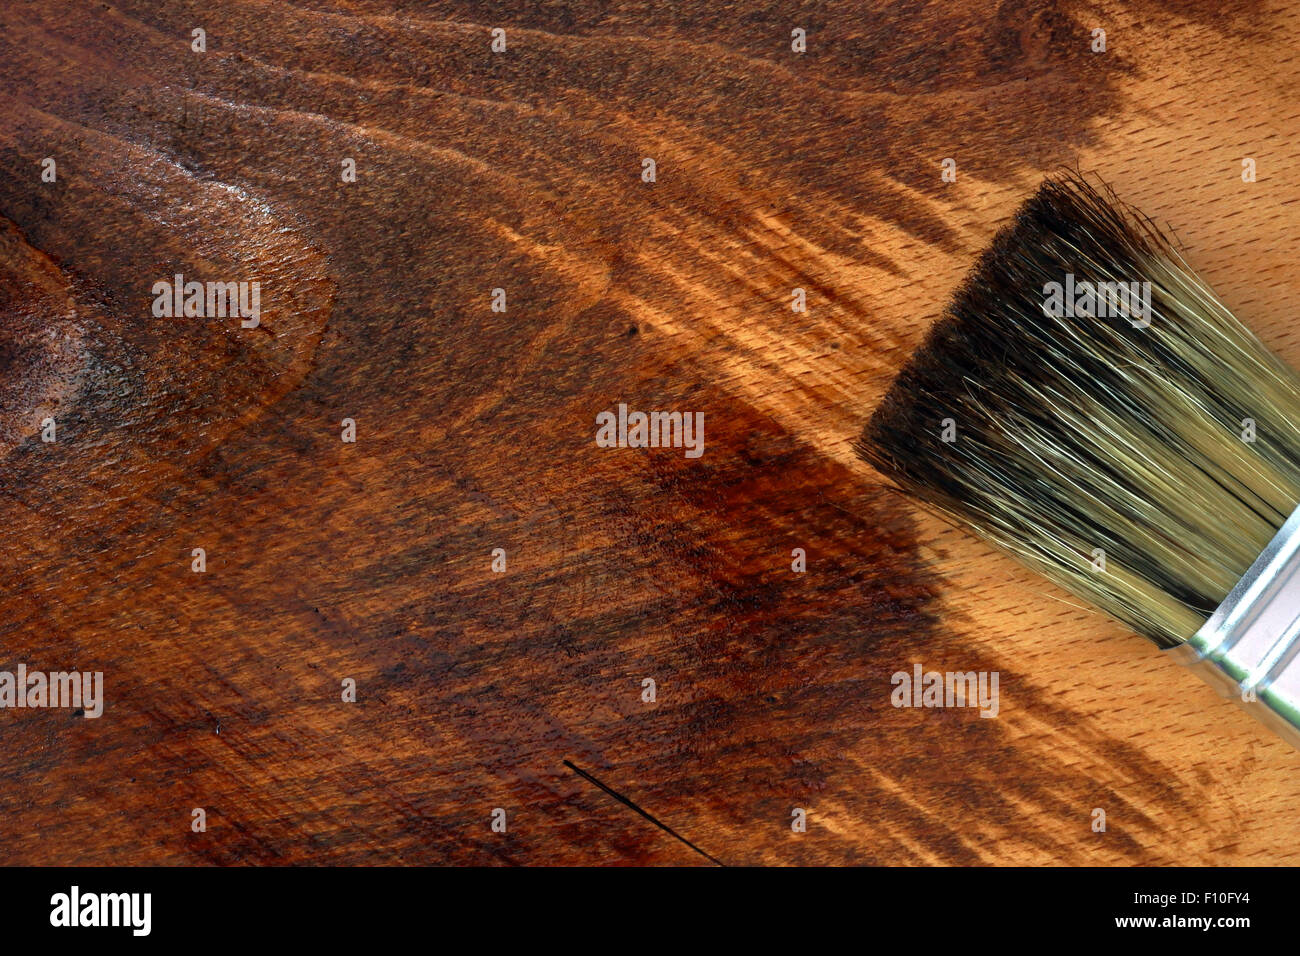 Staining wooden surface. Home decorating concept. DIY Stock Photo